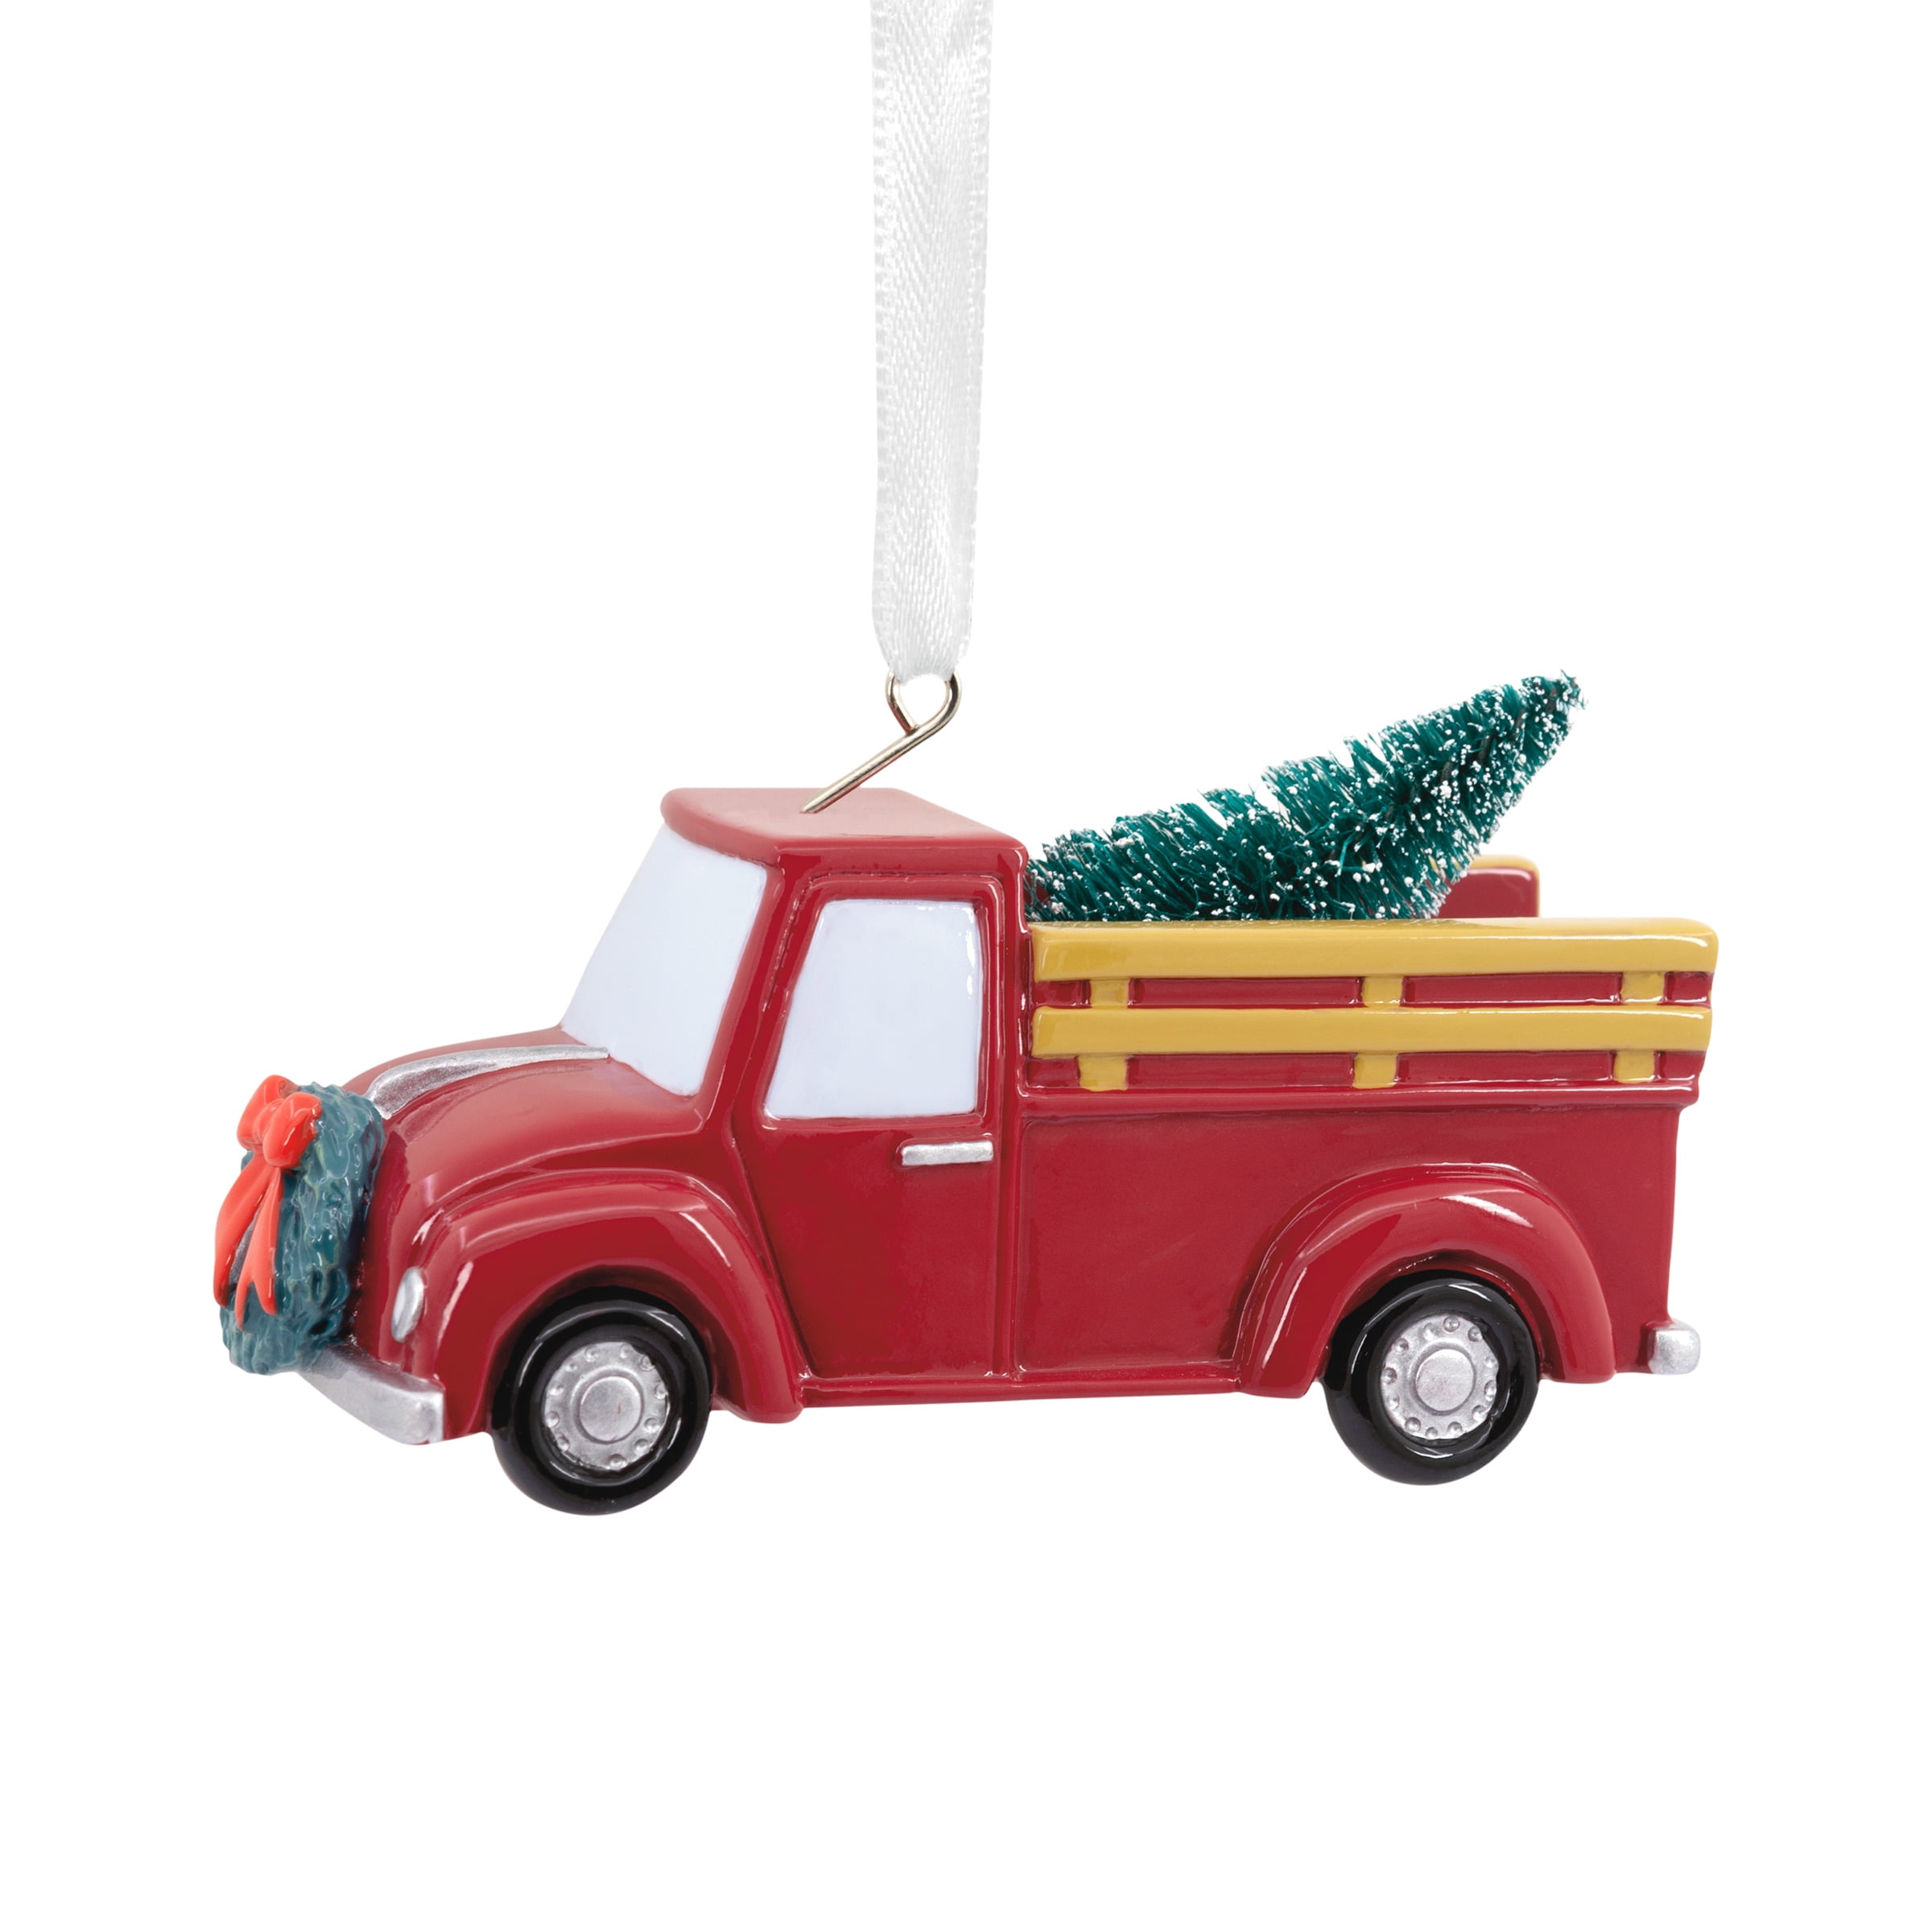 Vintage Old Red Pickup Truck With Christmas Tree Print Only 8x10 